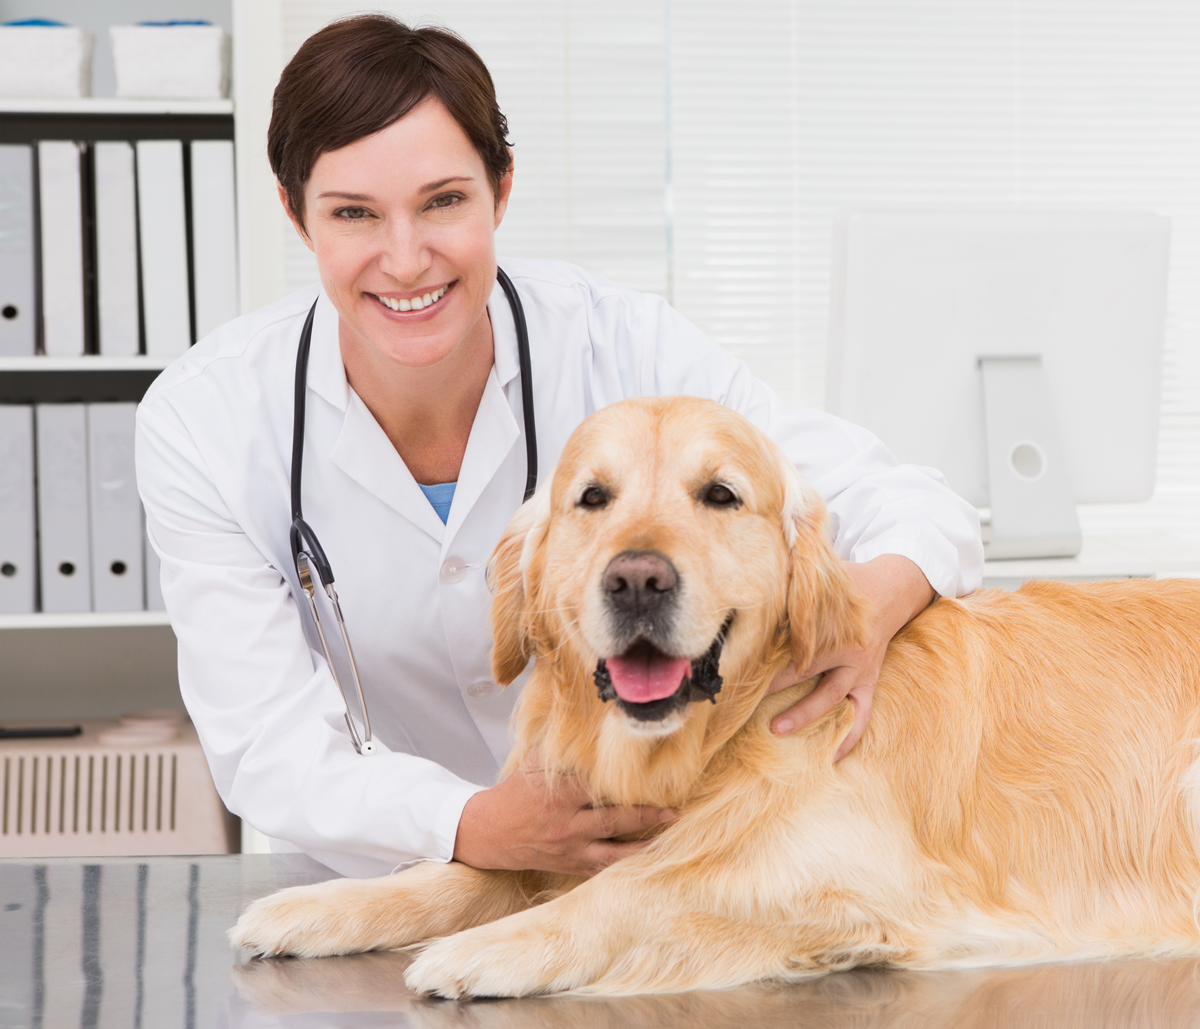 Protect your pet’s health and happiness with quality, preventive veterinary care